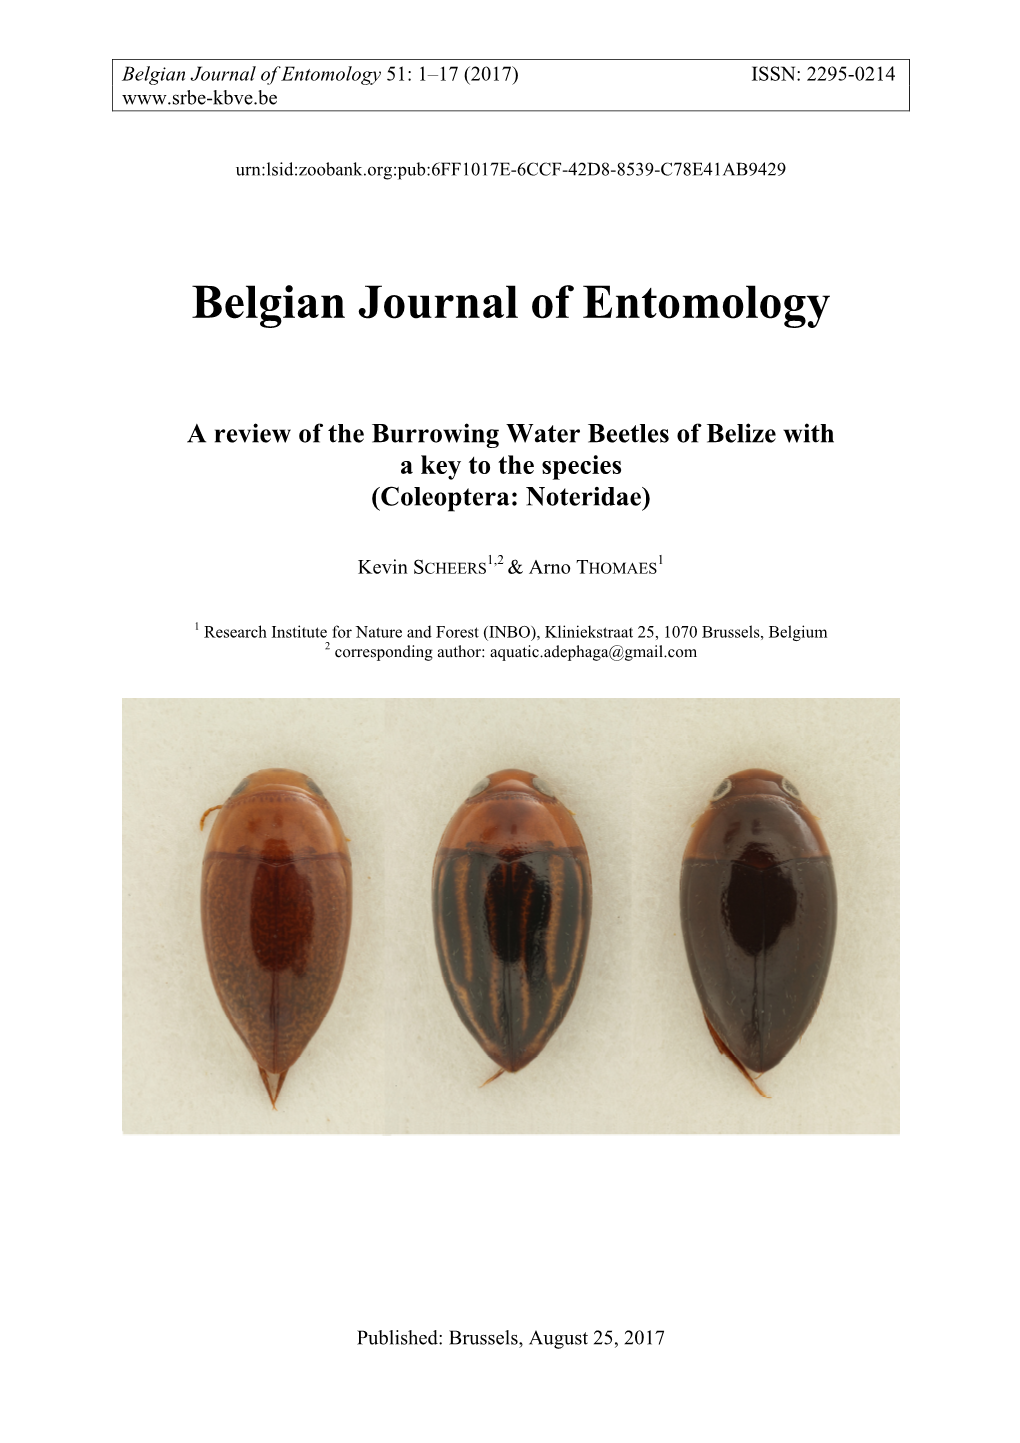 Belgian Journal of Entomology a Review of the Burrowing Water